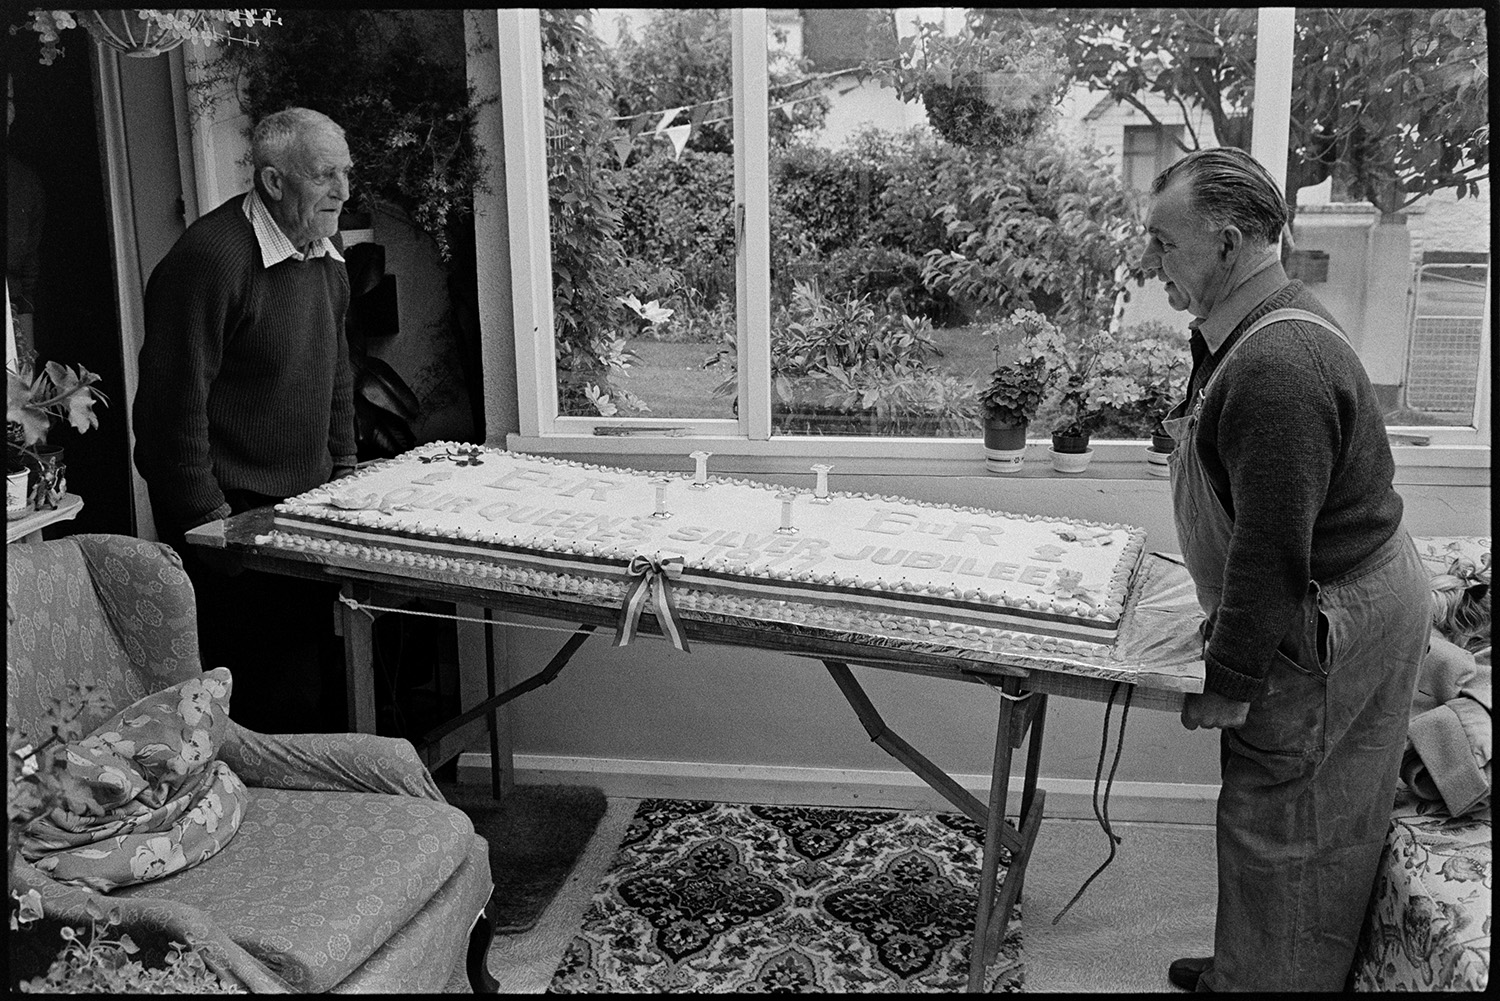 Huge cake being assembled, with crown for tea on Jubilee day! 
[Cyril Dumbleton and another man moving a huge cake through a room in a house in Dolton on Queen Elizabeth II Silver Jubilee Day. The cake is for the village celebrations.]